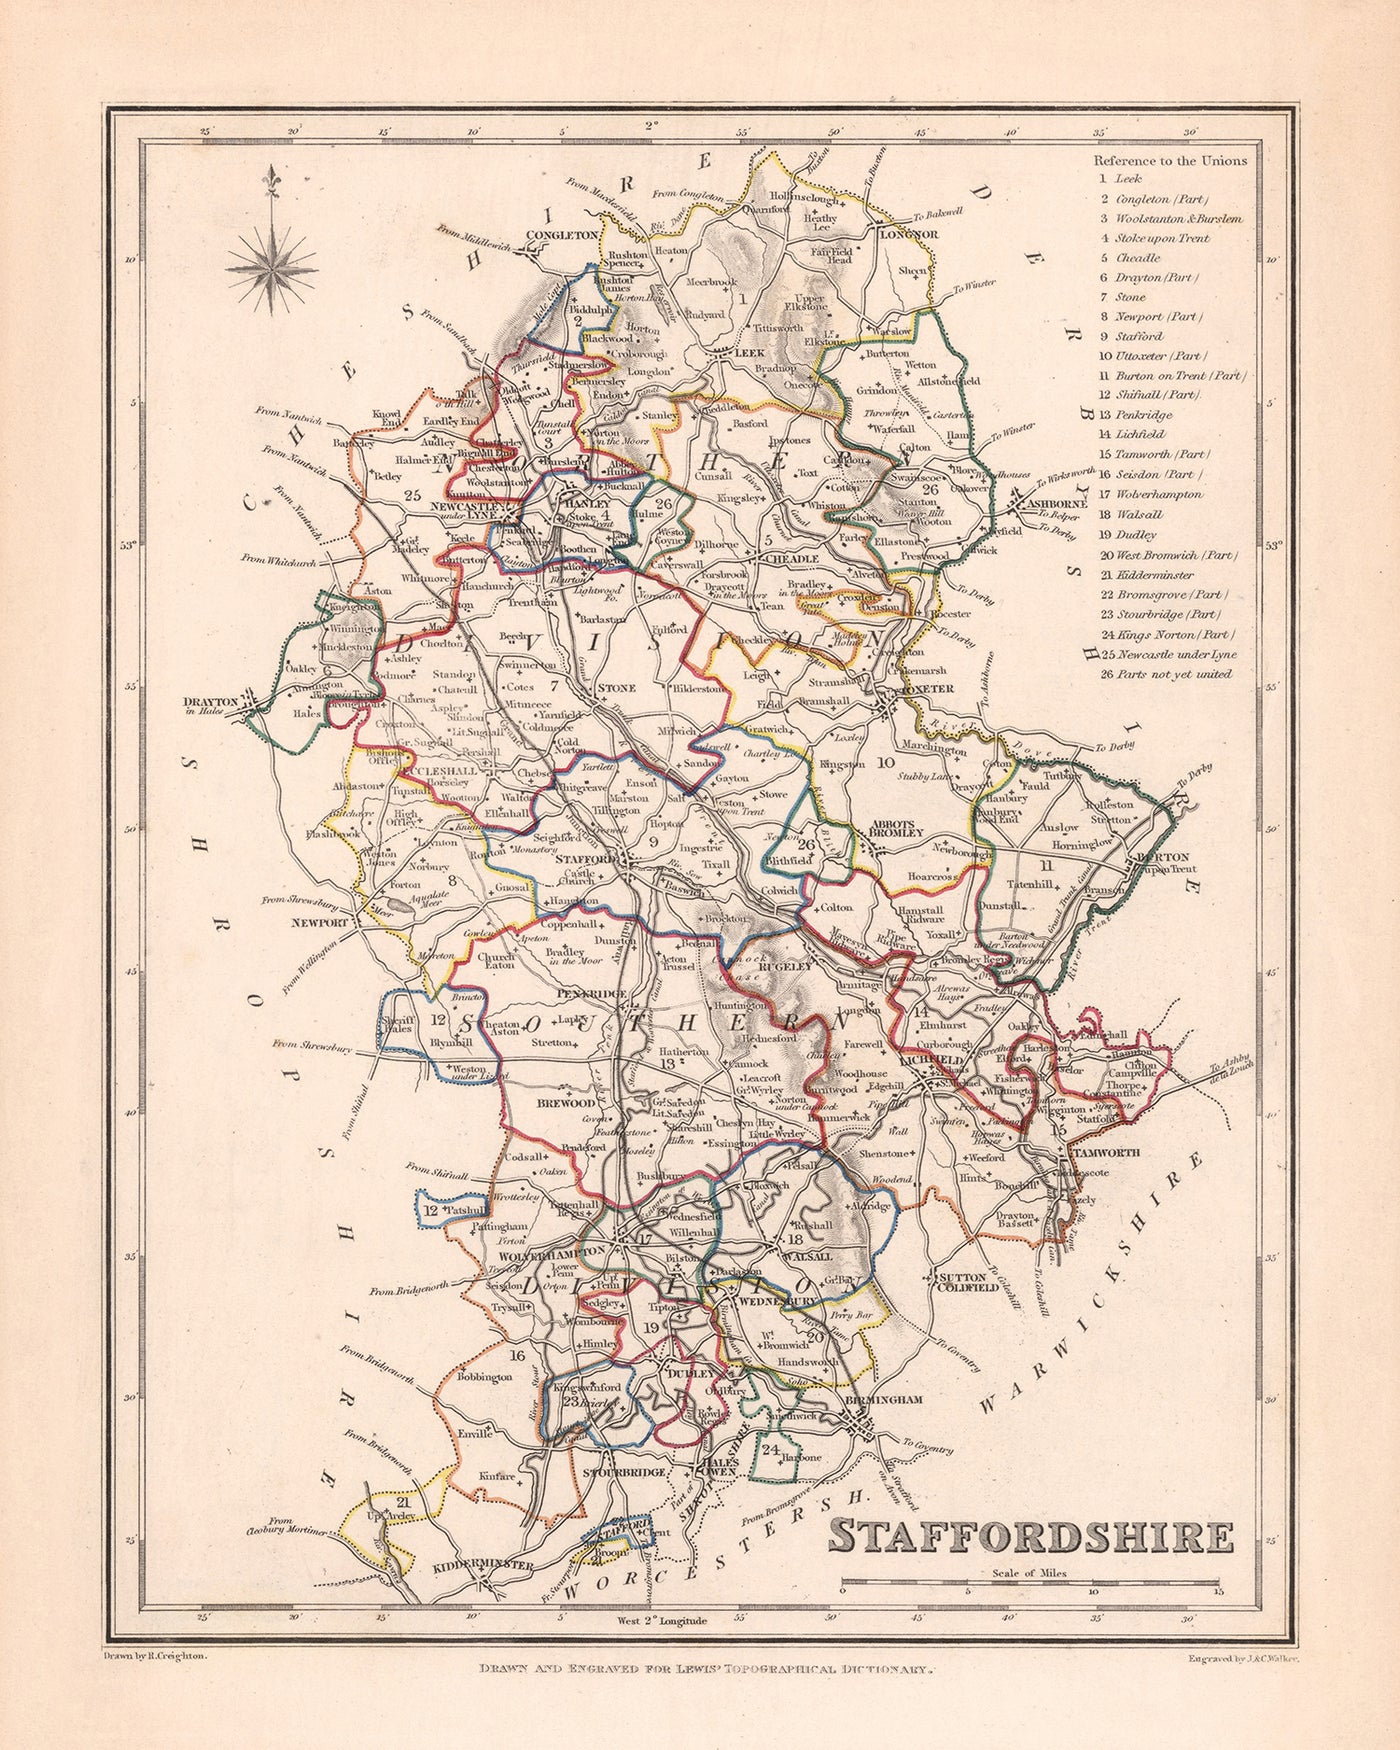 Old Map of Staffordshire by Samuel Lewis, 1844: Wolverhampton, Stoke-on-Trent, Lichfield, Tamworth, Cannock Chase